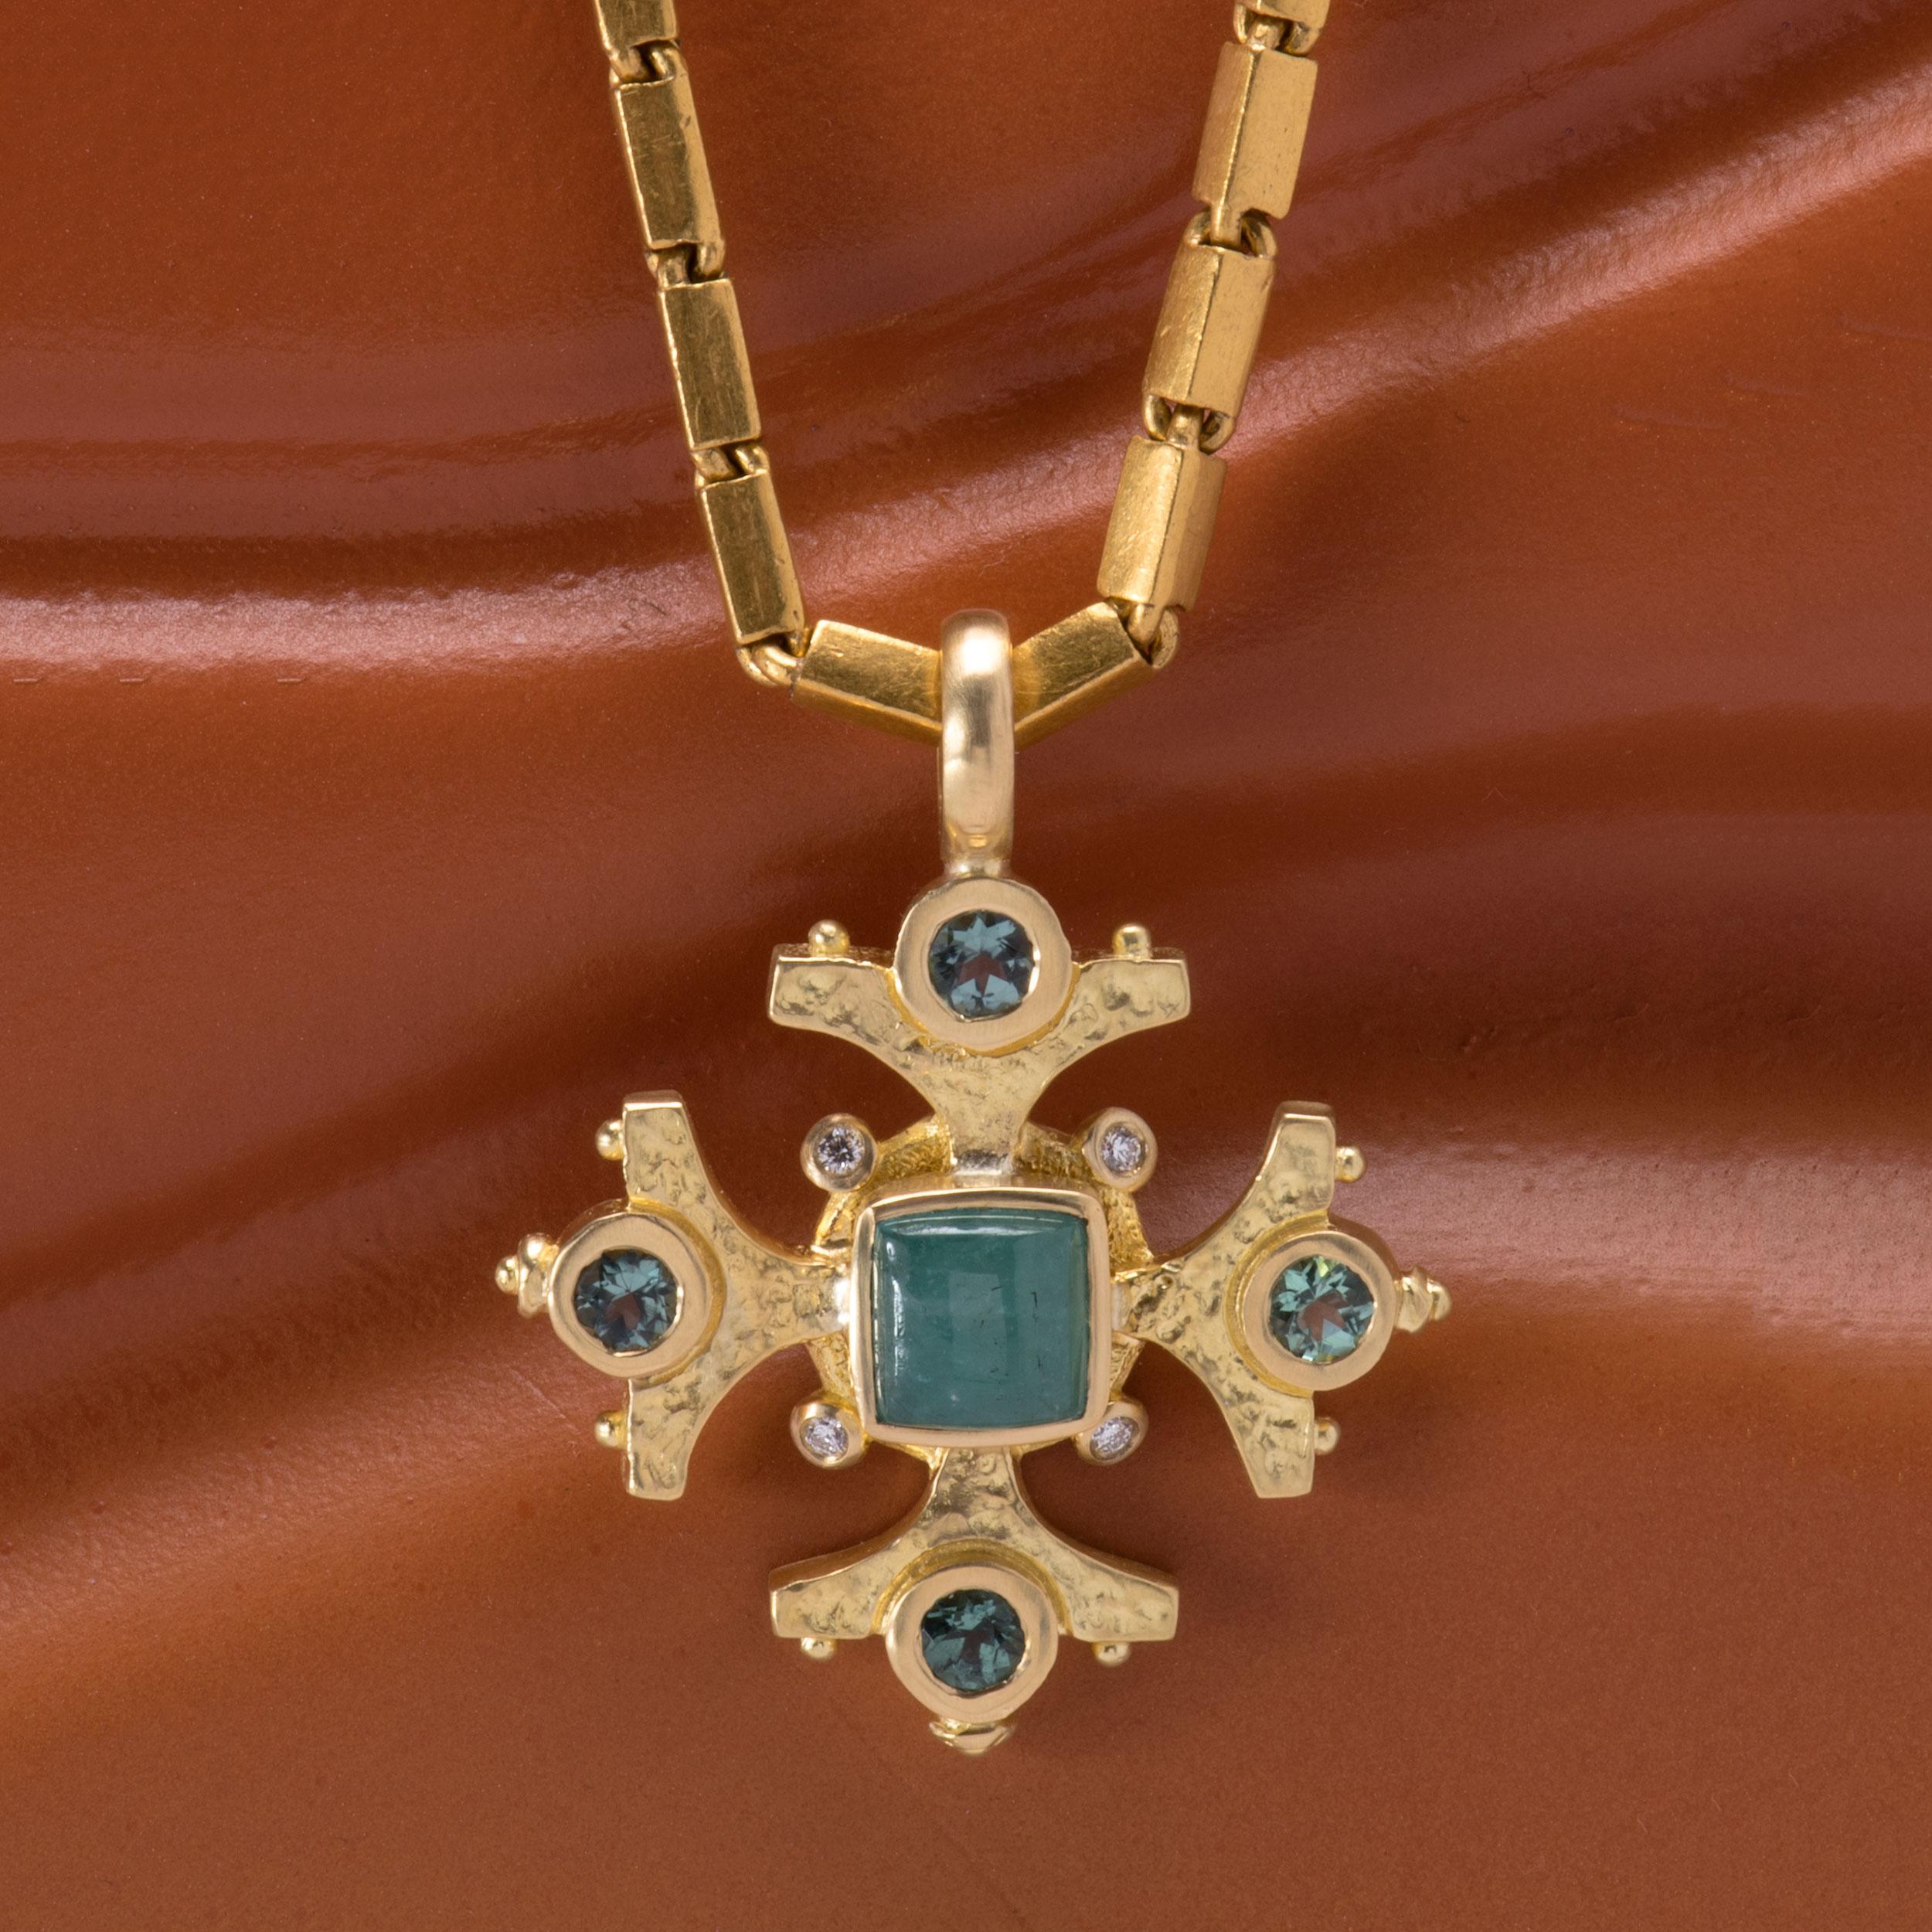 A quartet of sea foam green tourmalines 1.12tcw pay homage to a stunning soft Paraiba tourmaline 2.68cts which centers this handcrafted Maltese Cross pendant. A hammered satin finish on this 18k gold pendant is enhanced at four points with twinkling